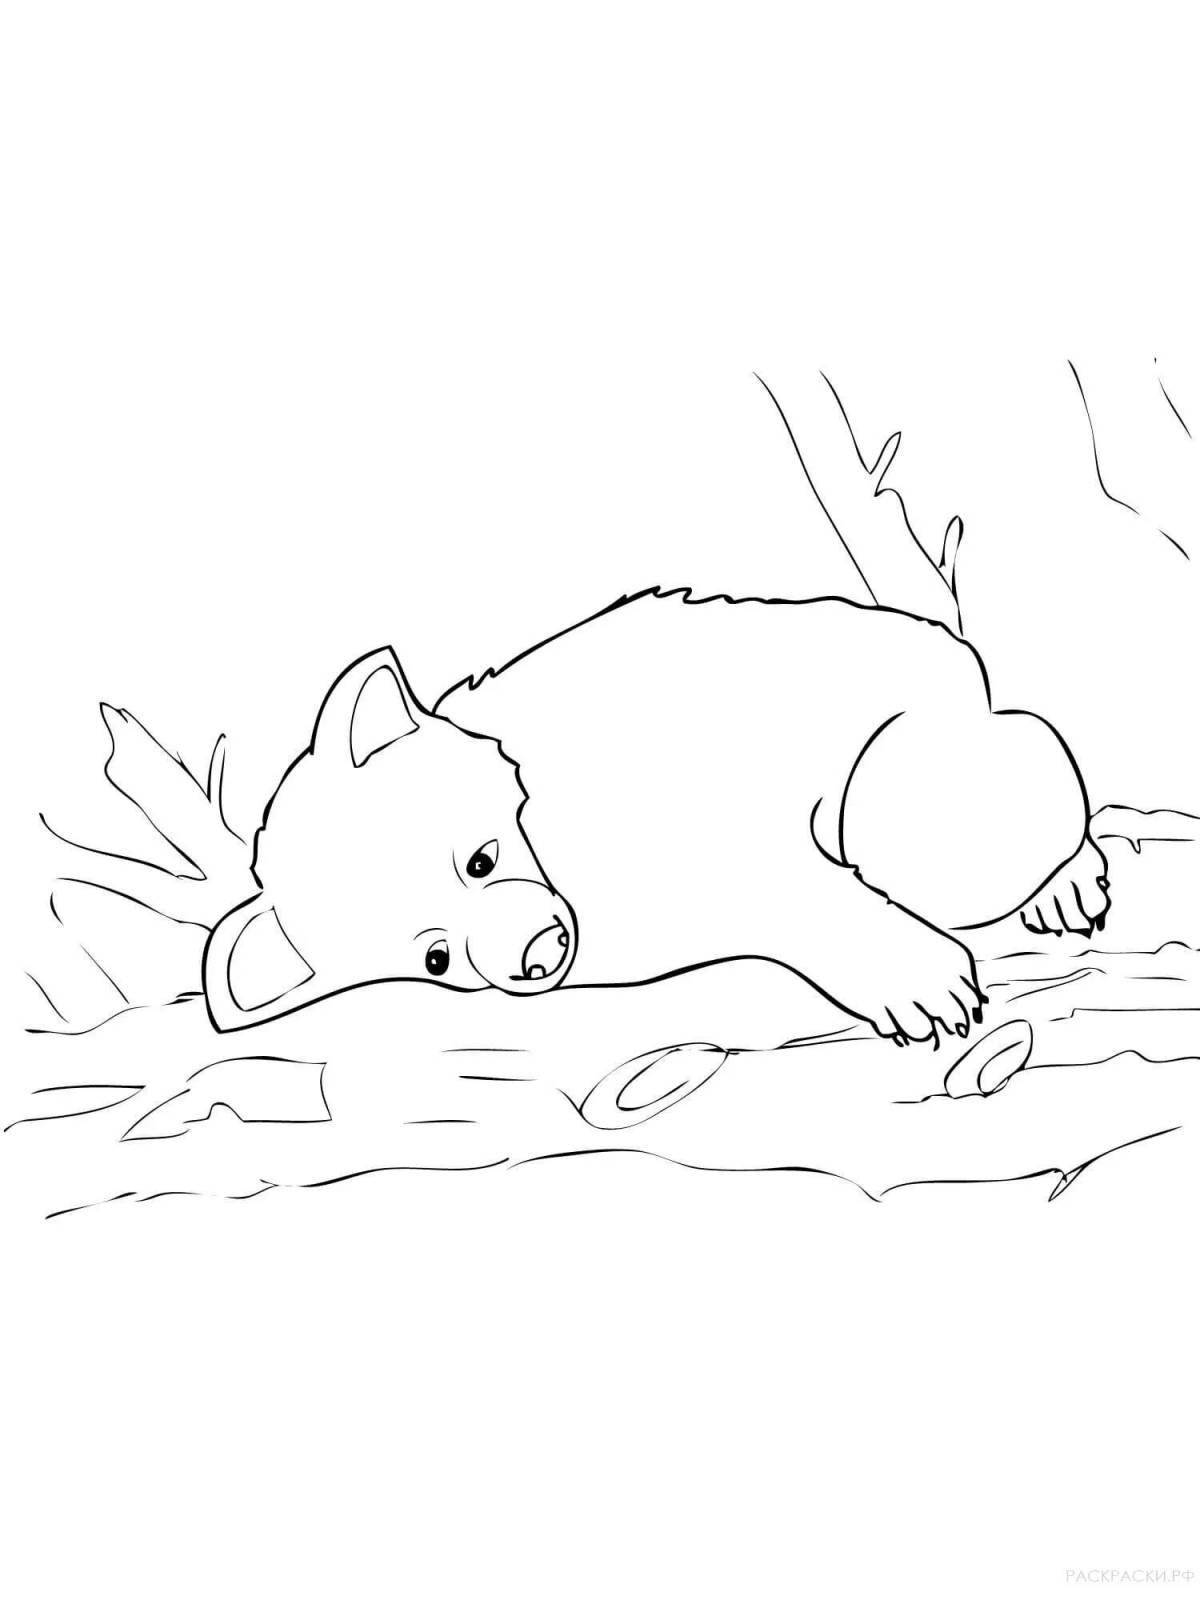 Adorable coloring book: why do bears sleep in winter?